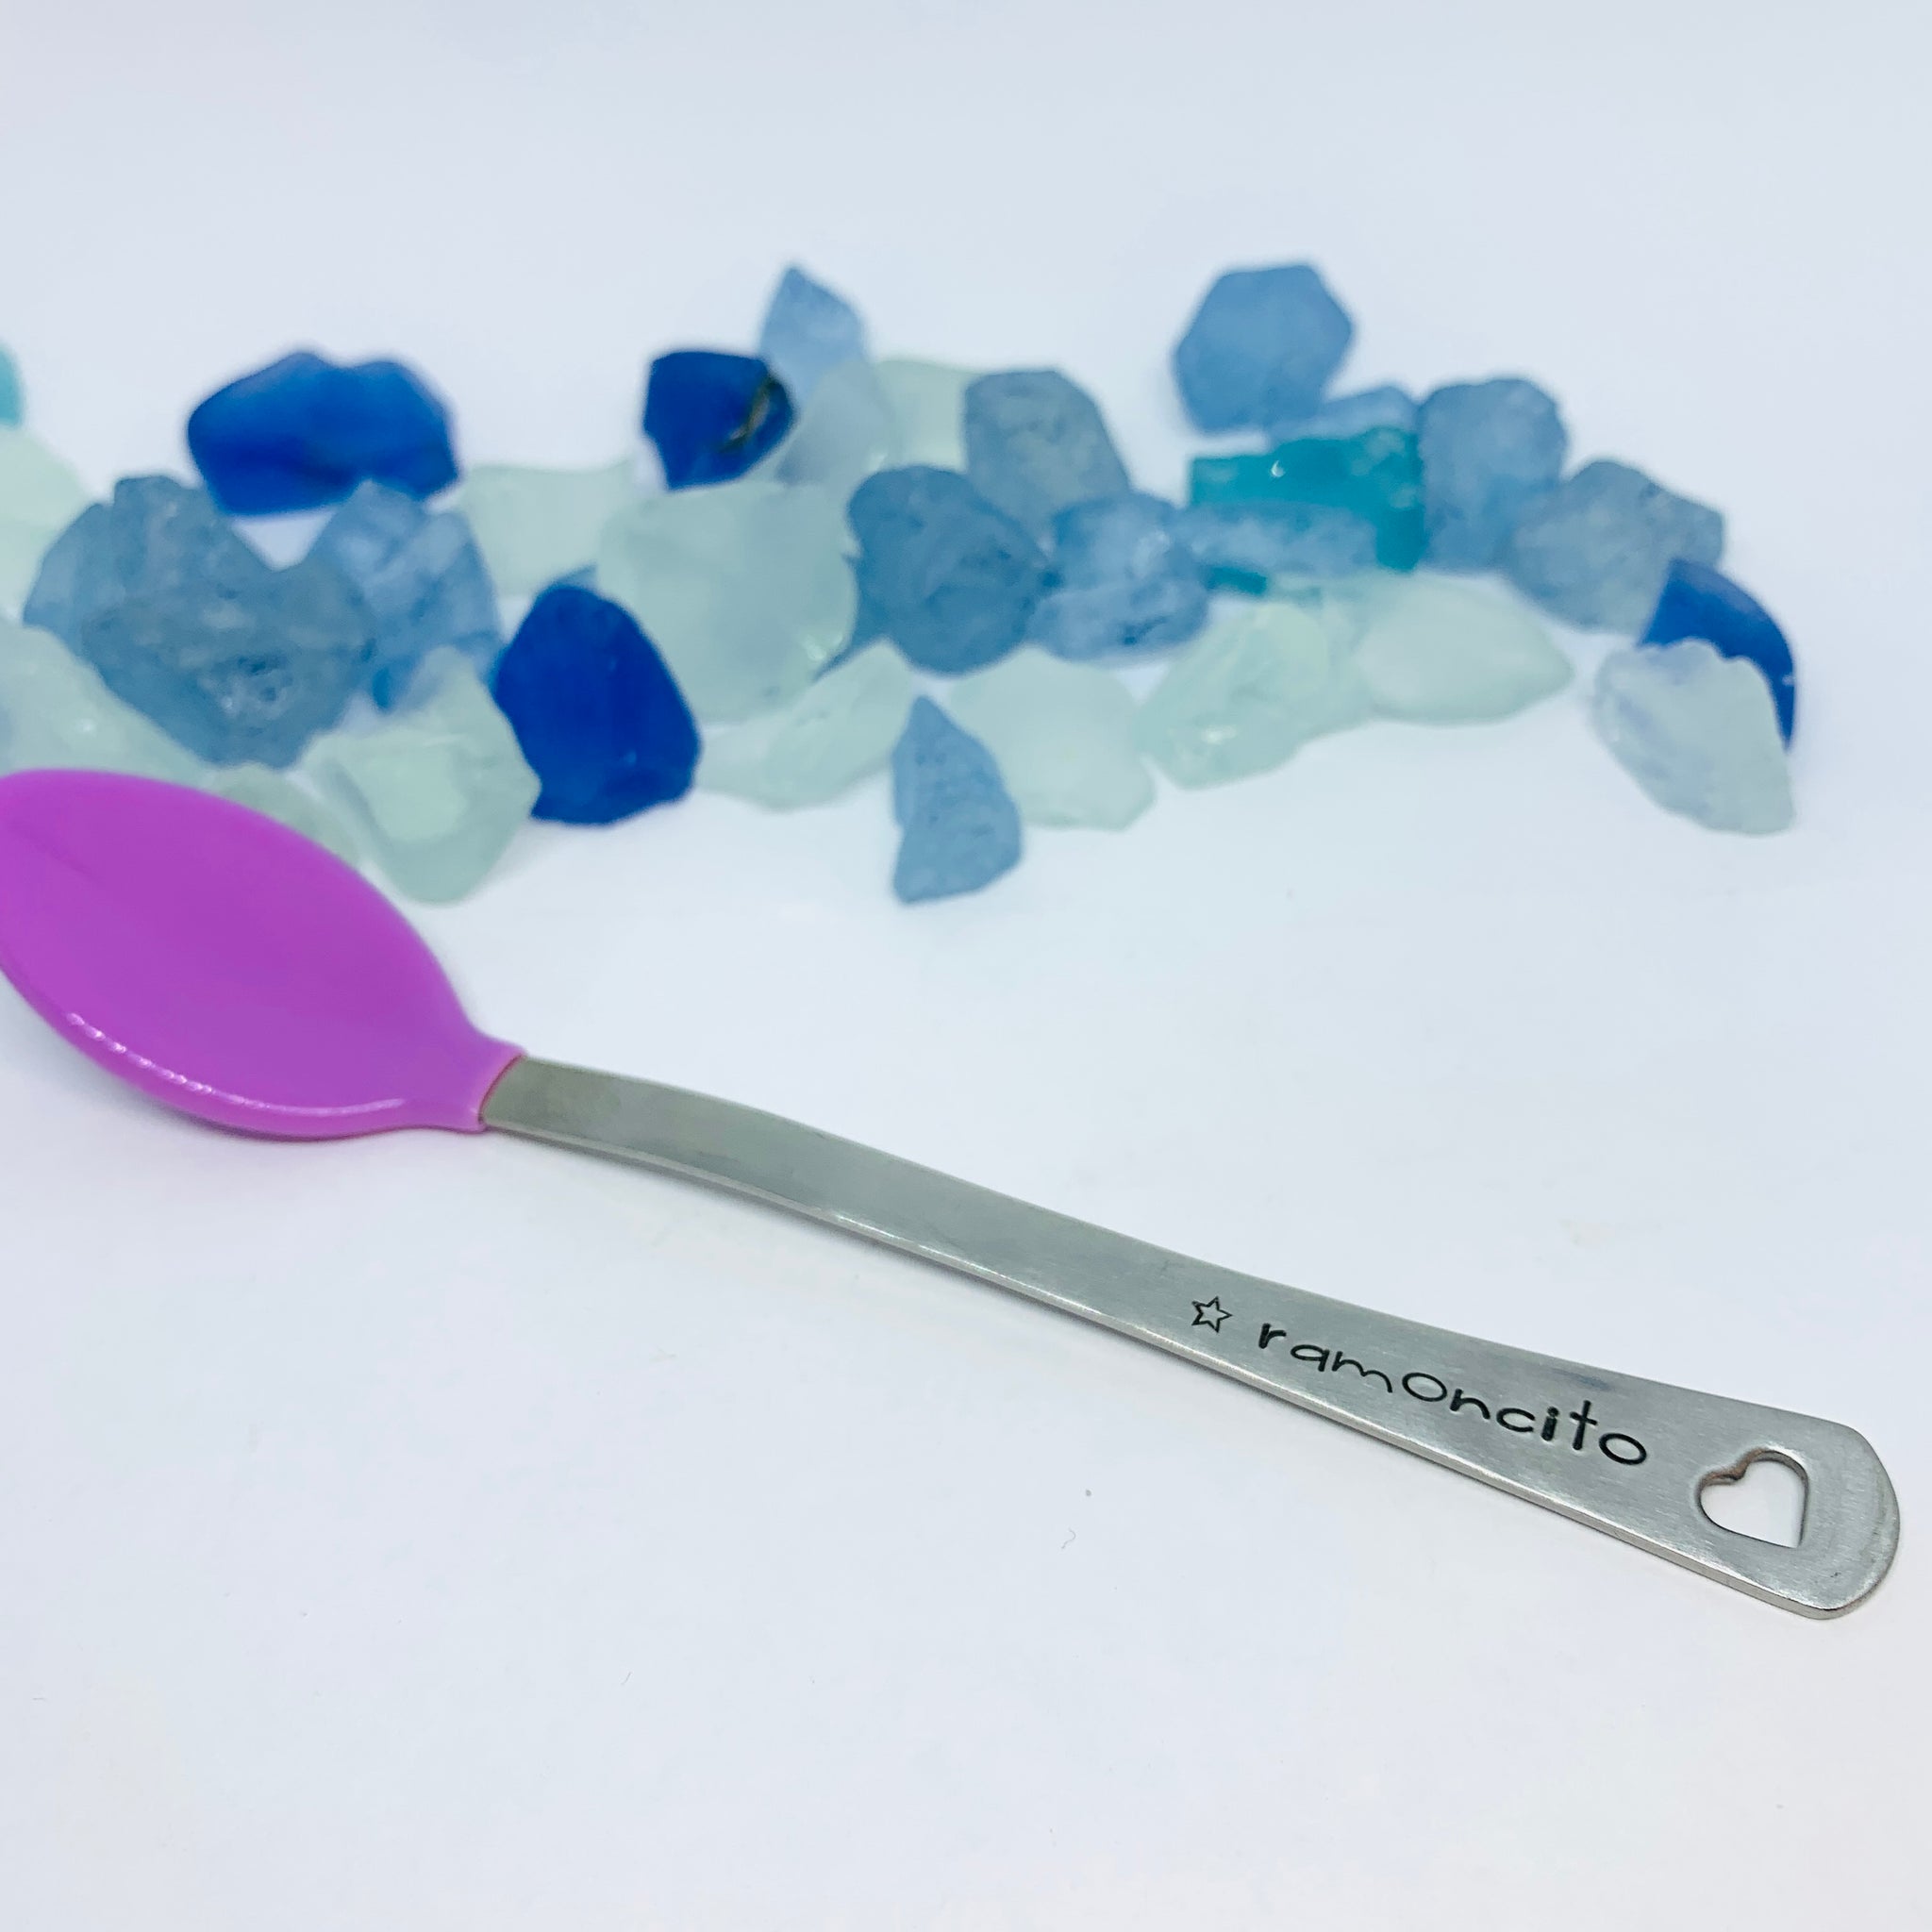 Munchkin Infant Spoons, Soft Tip, 3+ Months